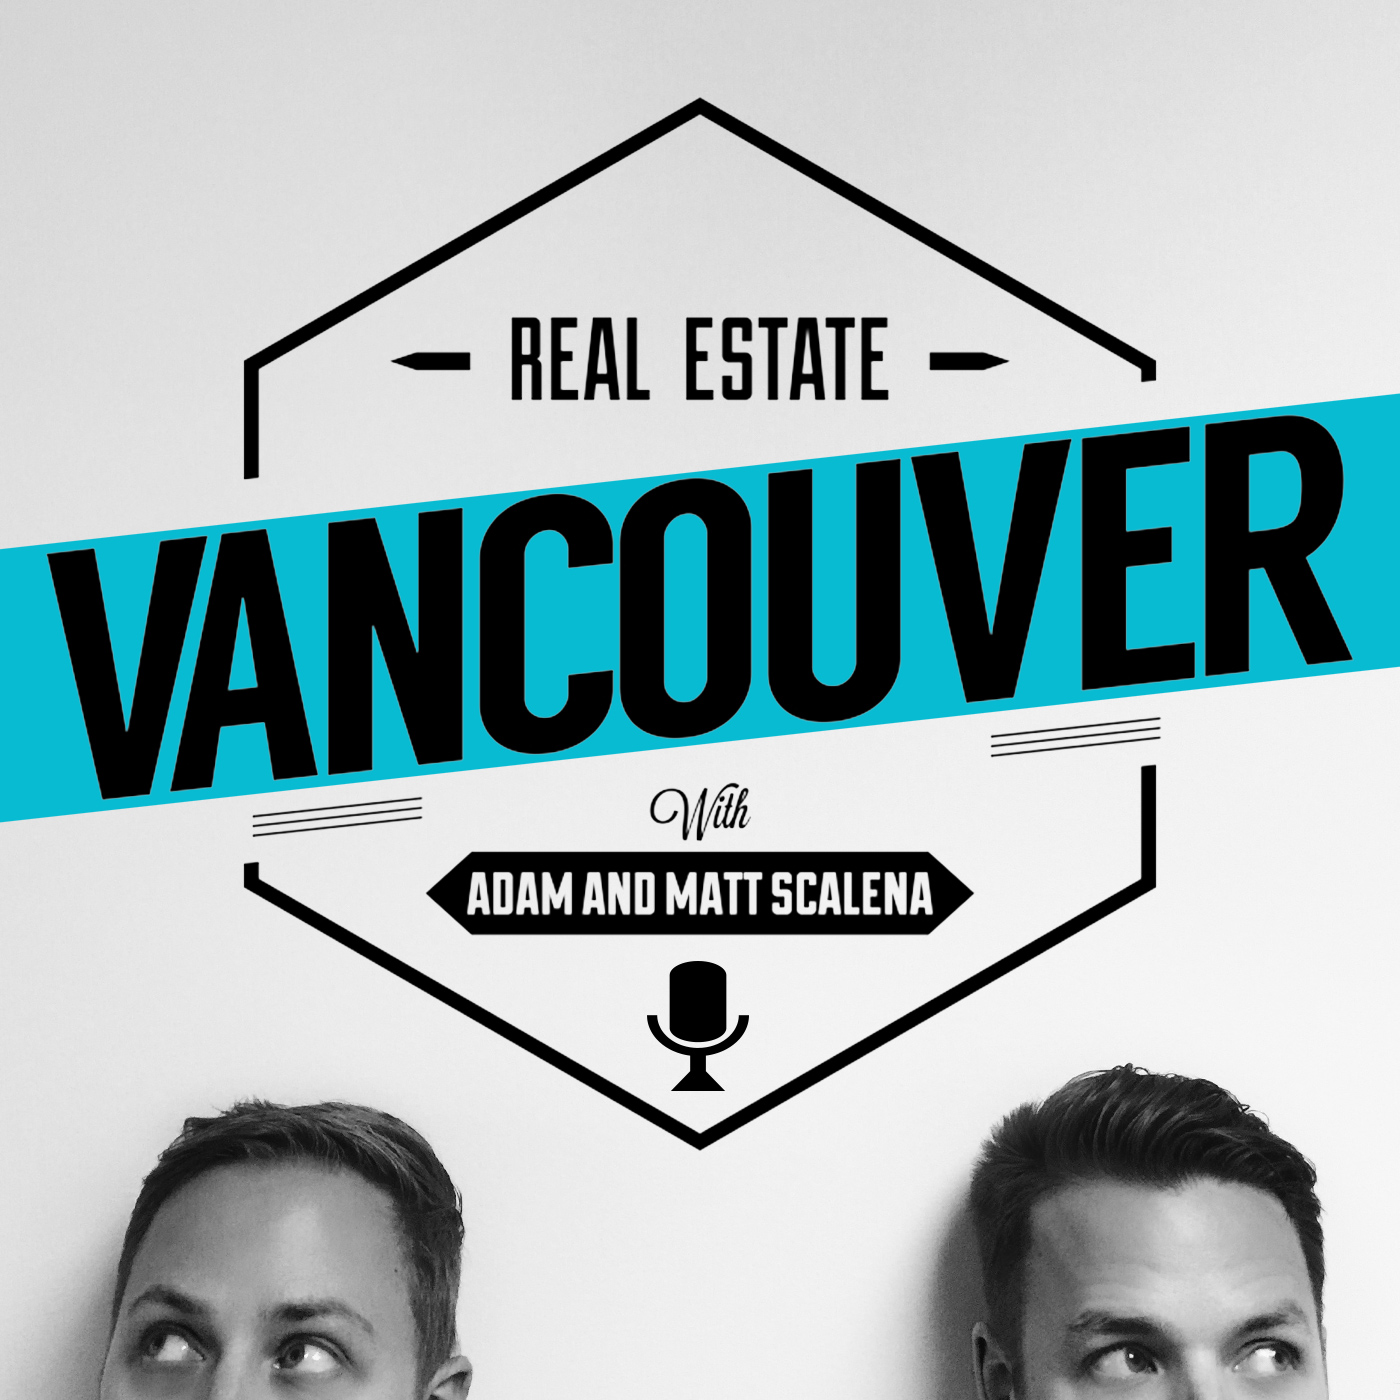 VREP #281 | Why You Might Want to Buy Vancouver Real Estate Right Now with Vince Taylor